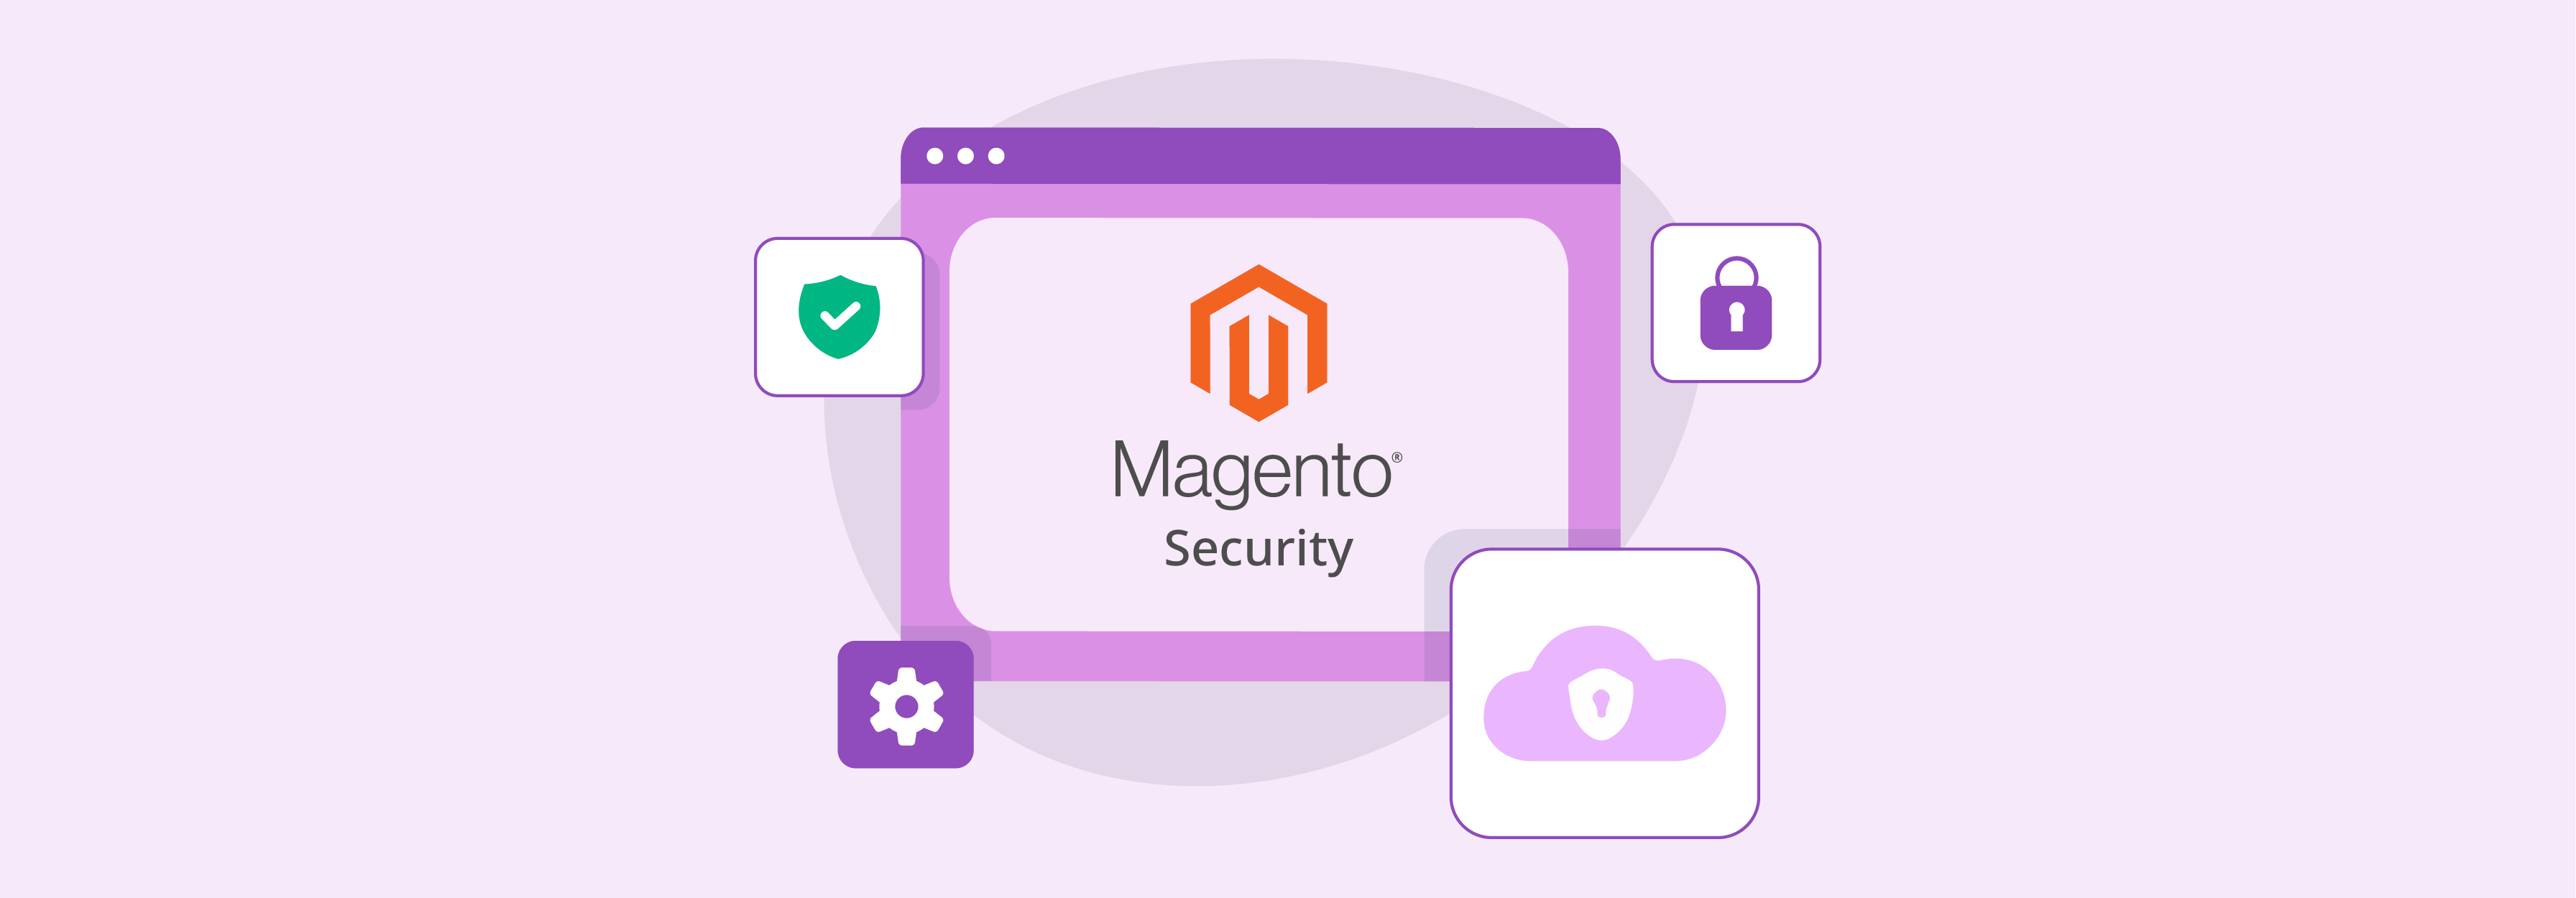 Magento 2's robust security features